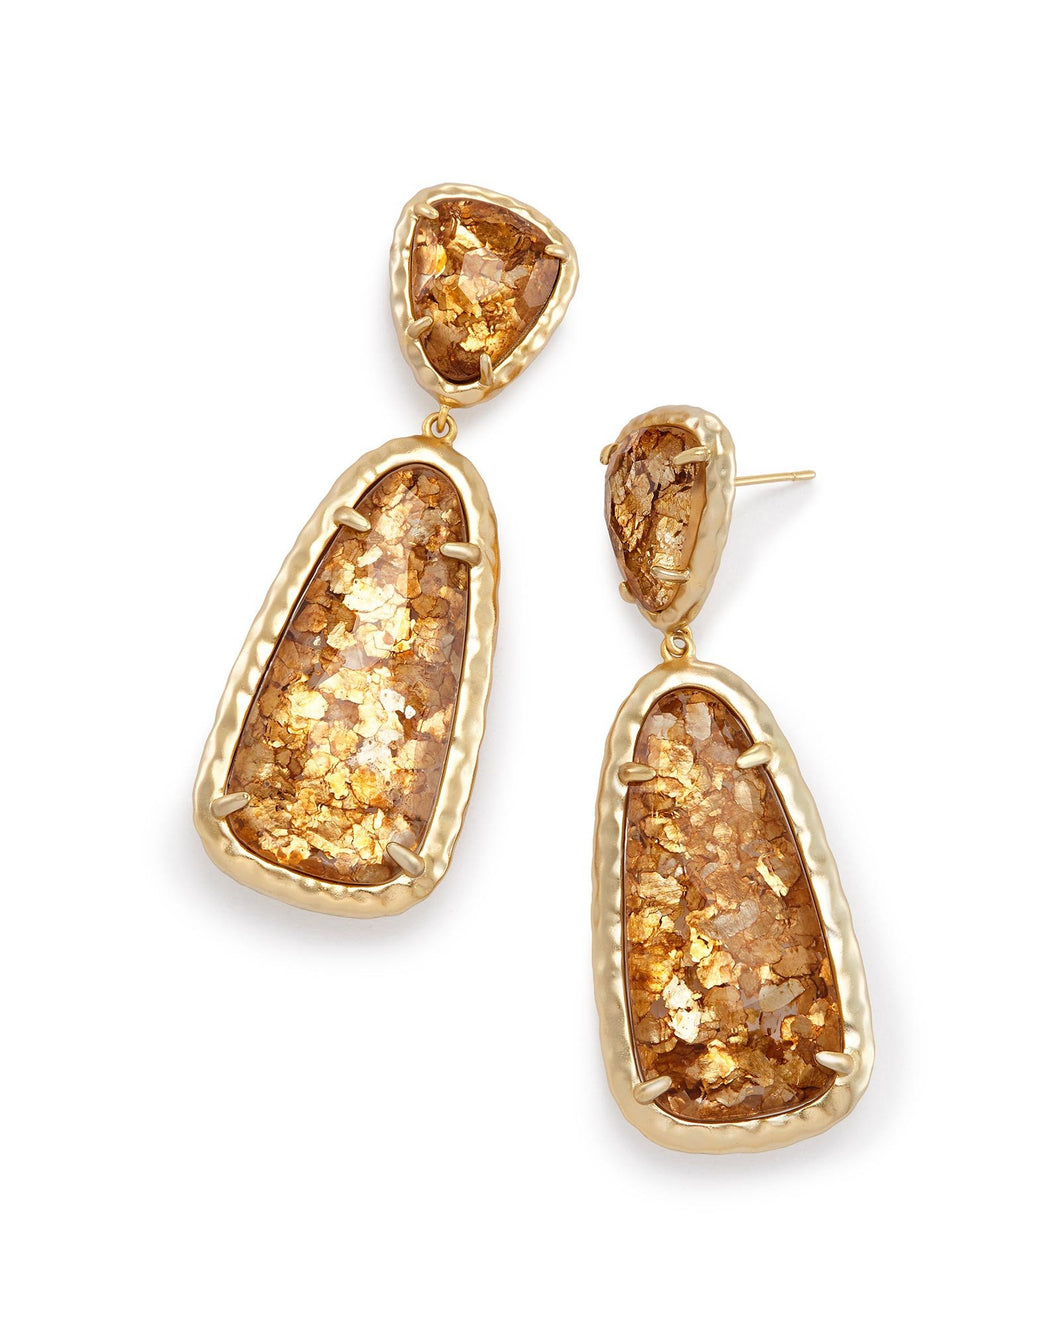 Crystal 18K Gold Filled Citrine Stone Drop Earrings